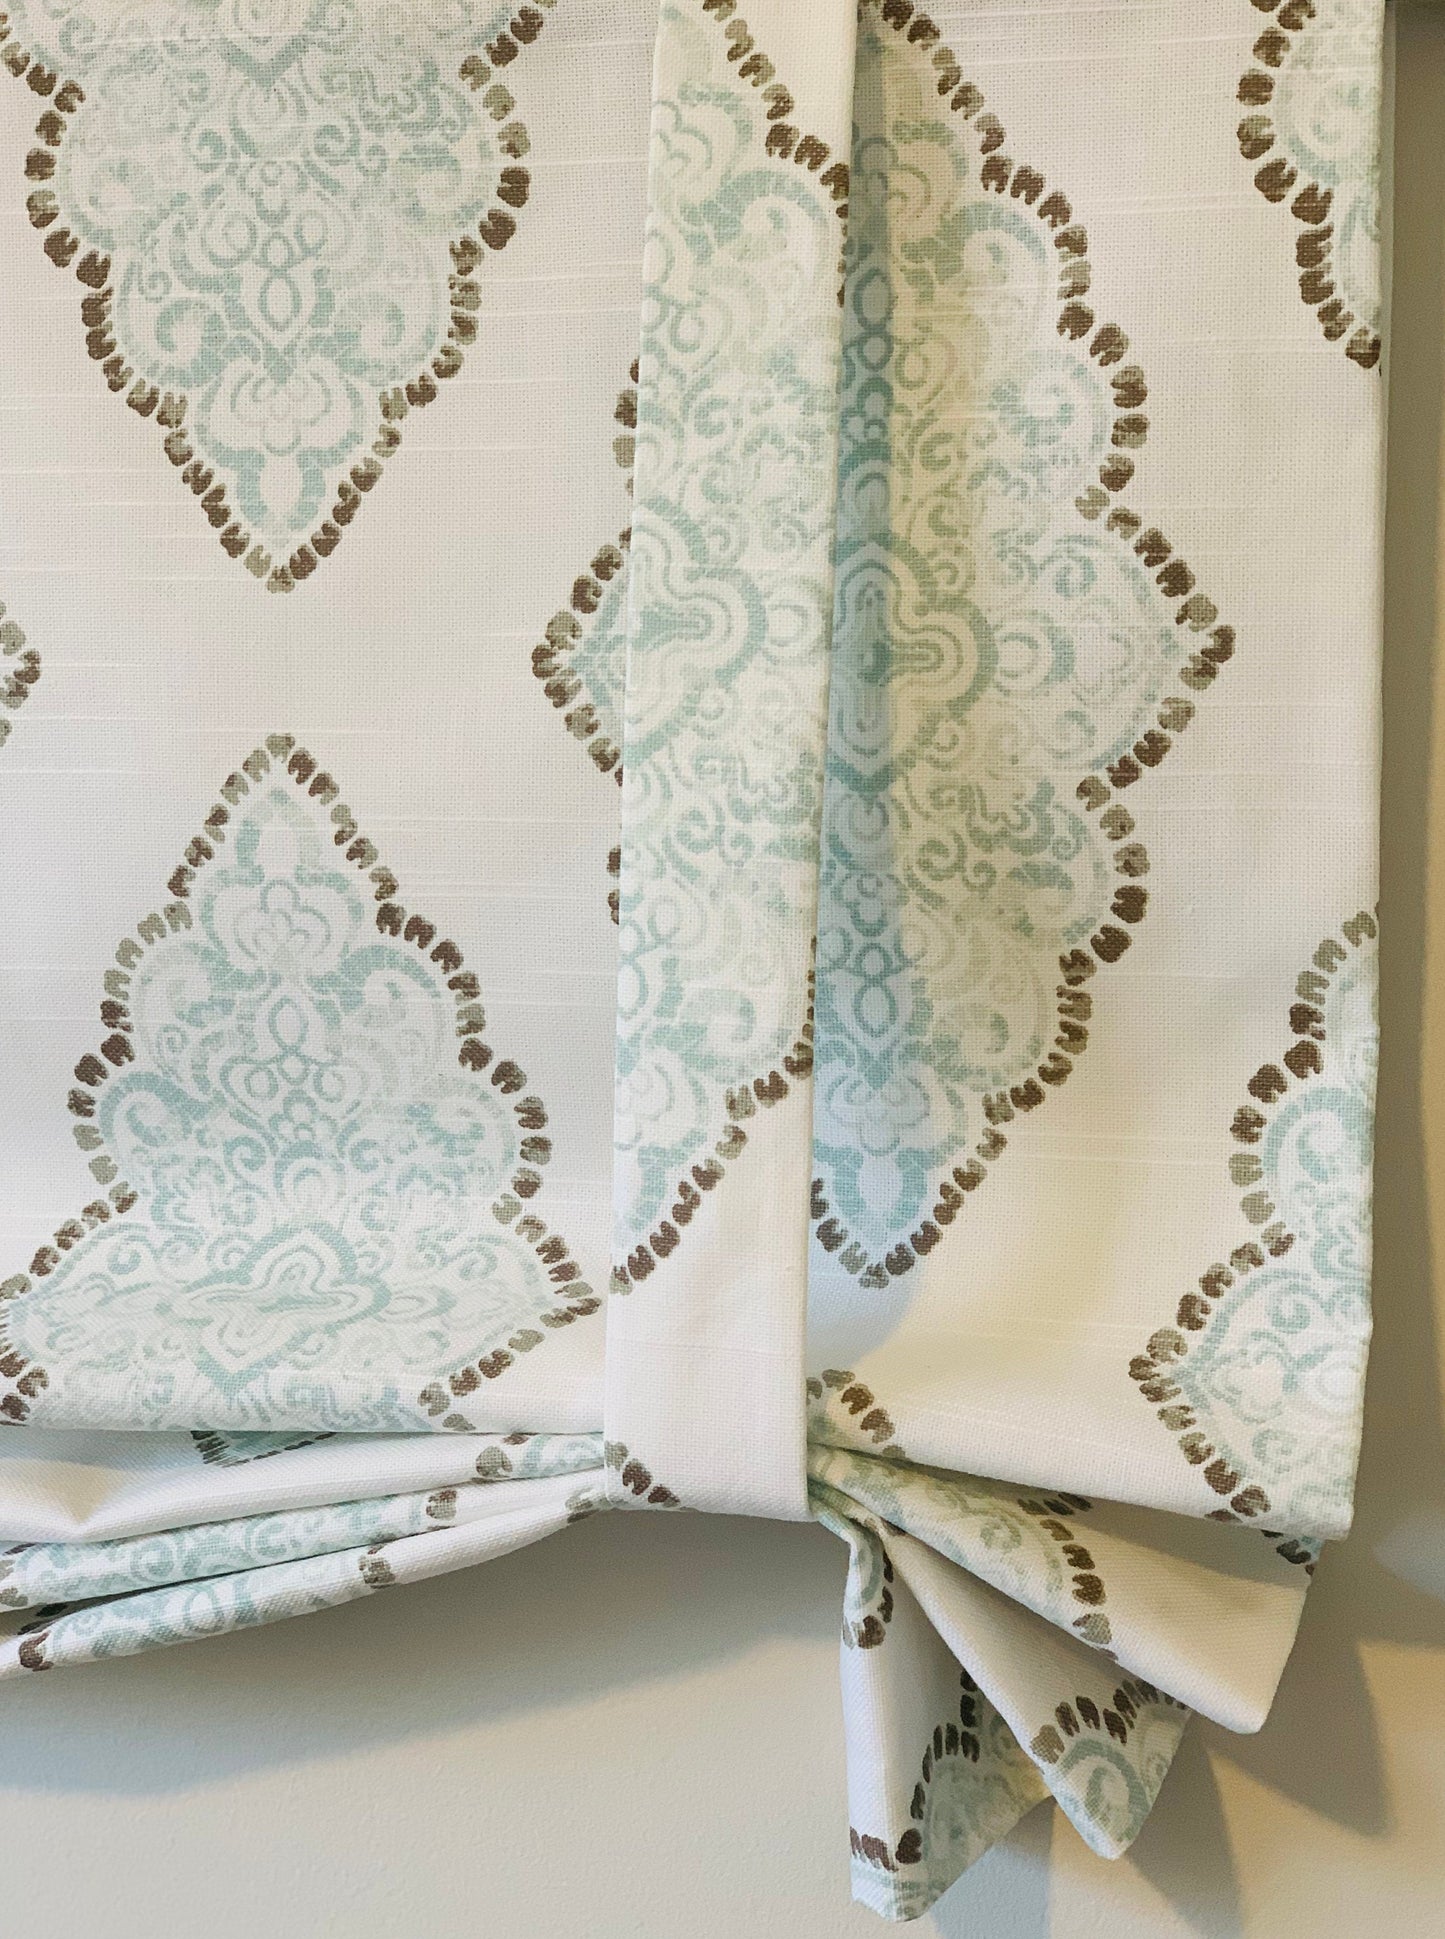 Custom Made, Fully Lined Tie Up Valance in Blue, White, Brown Damask Print, Relaxed Faux Roman Shade Valance, Monroe Snowy Cotton Slub